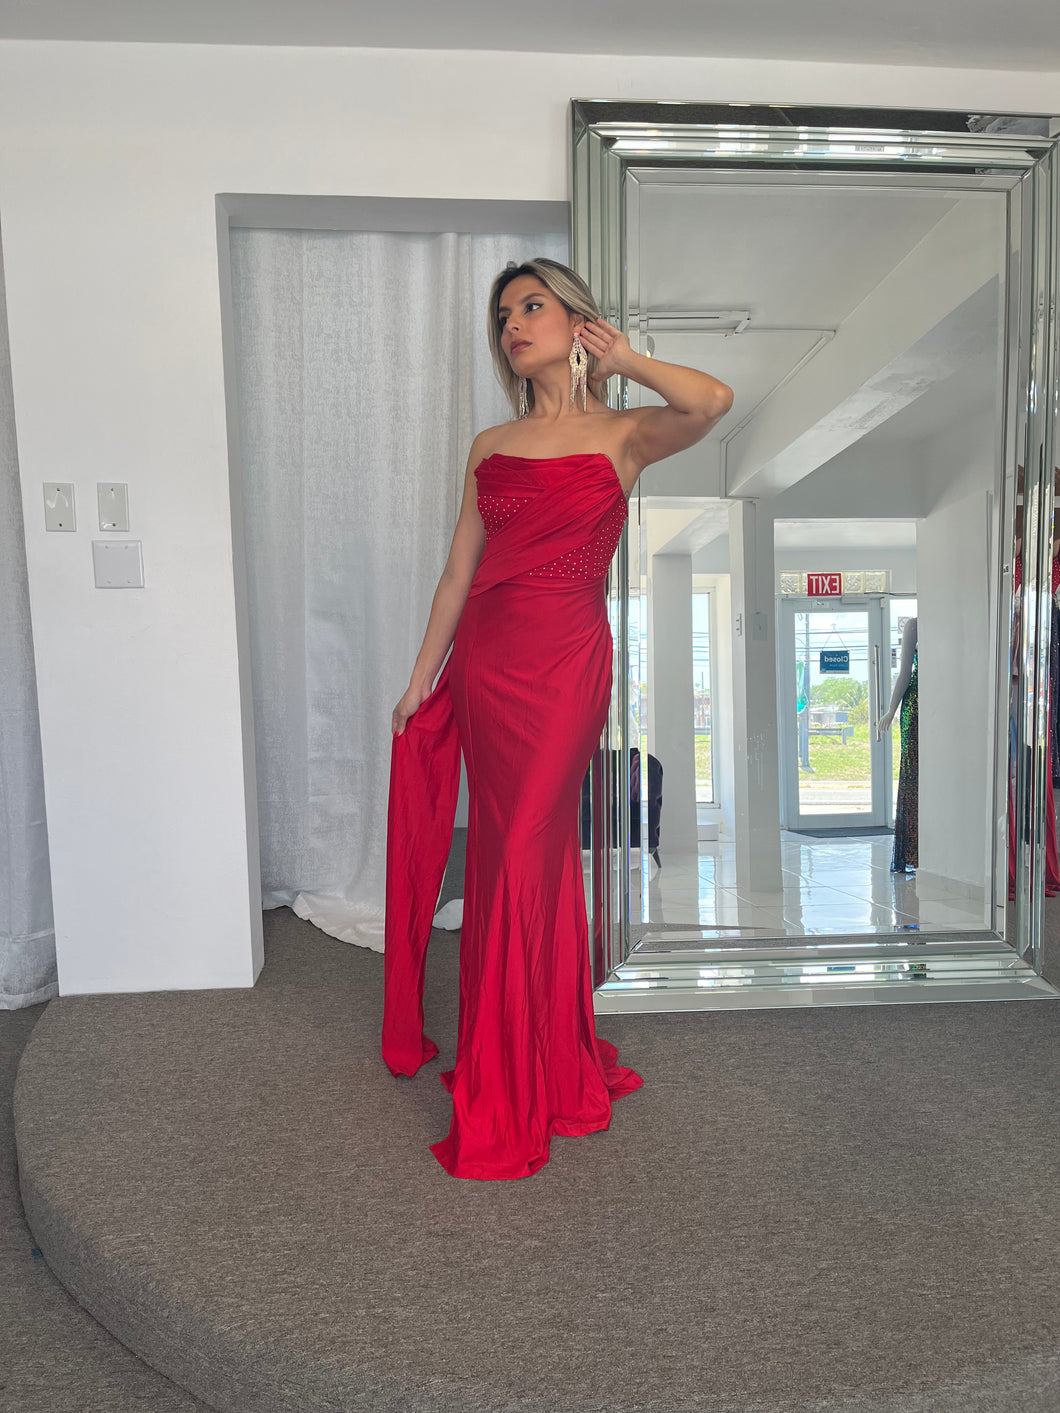 Red passion dress